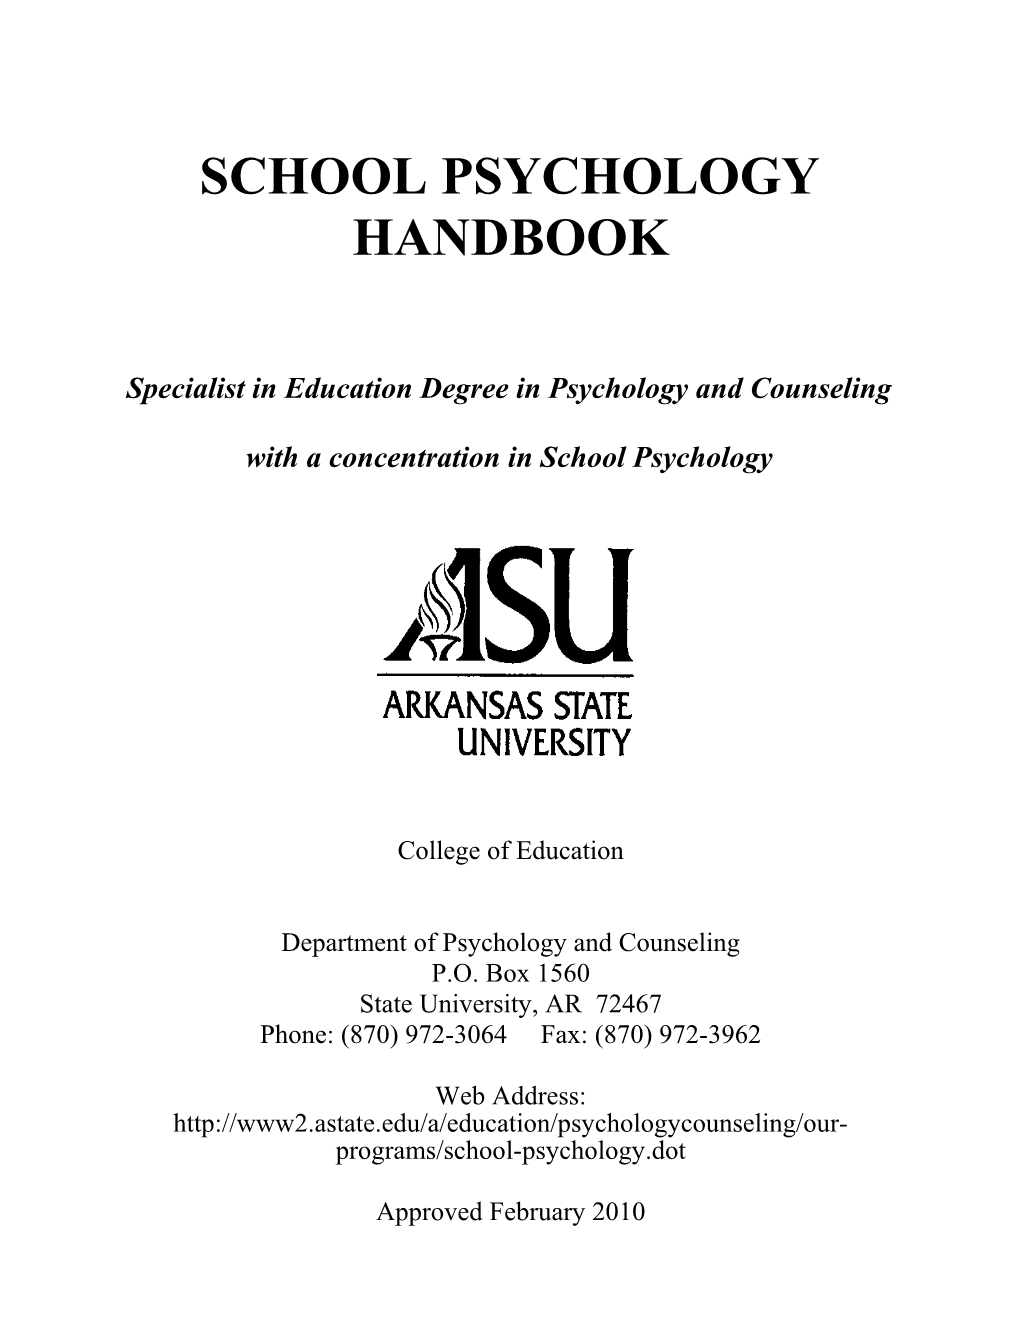 Specialist in Education Degree in Psychology and Counseling